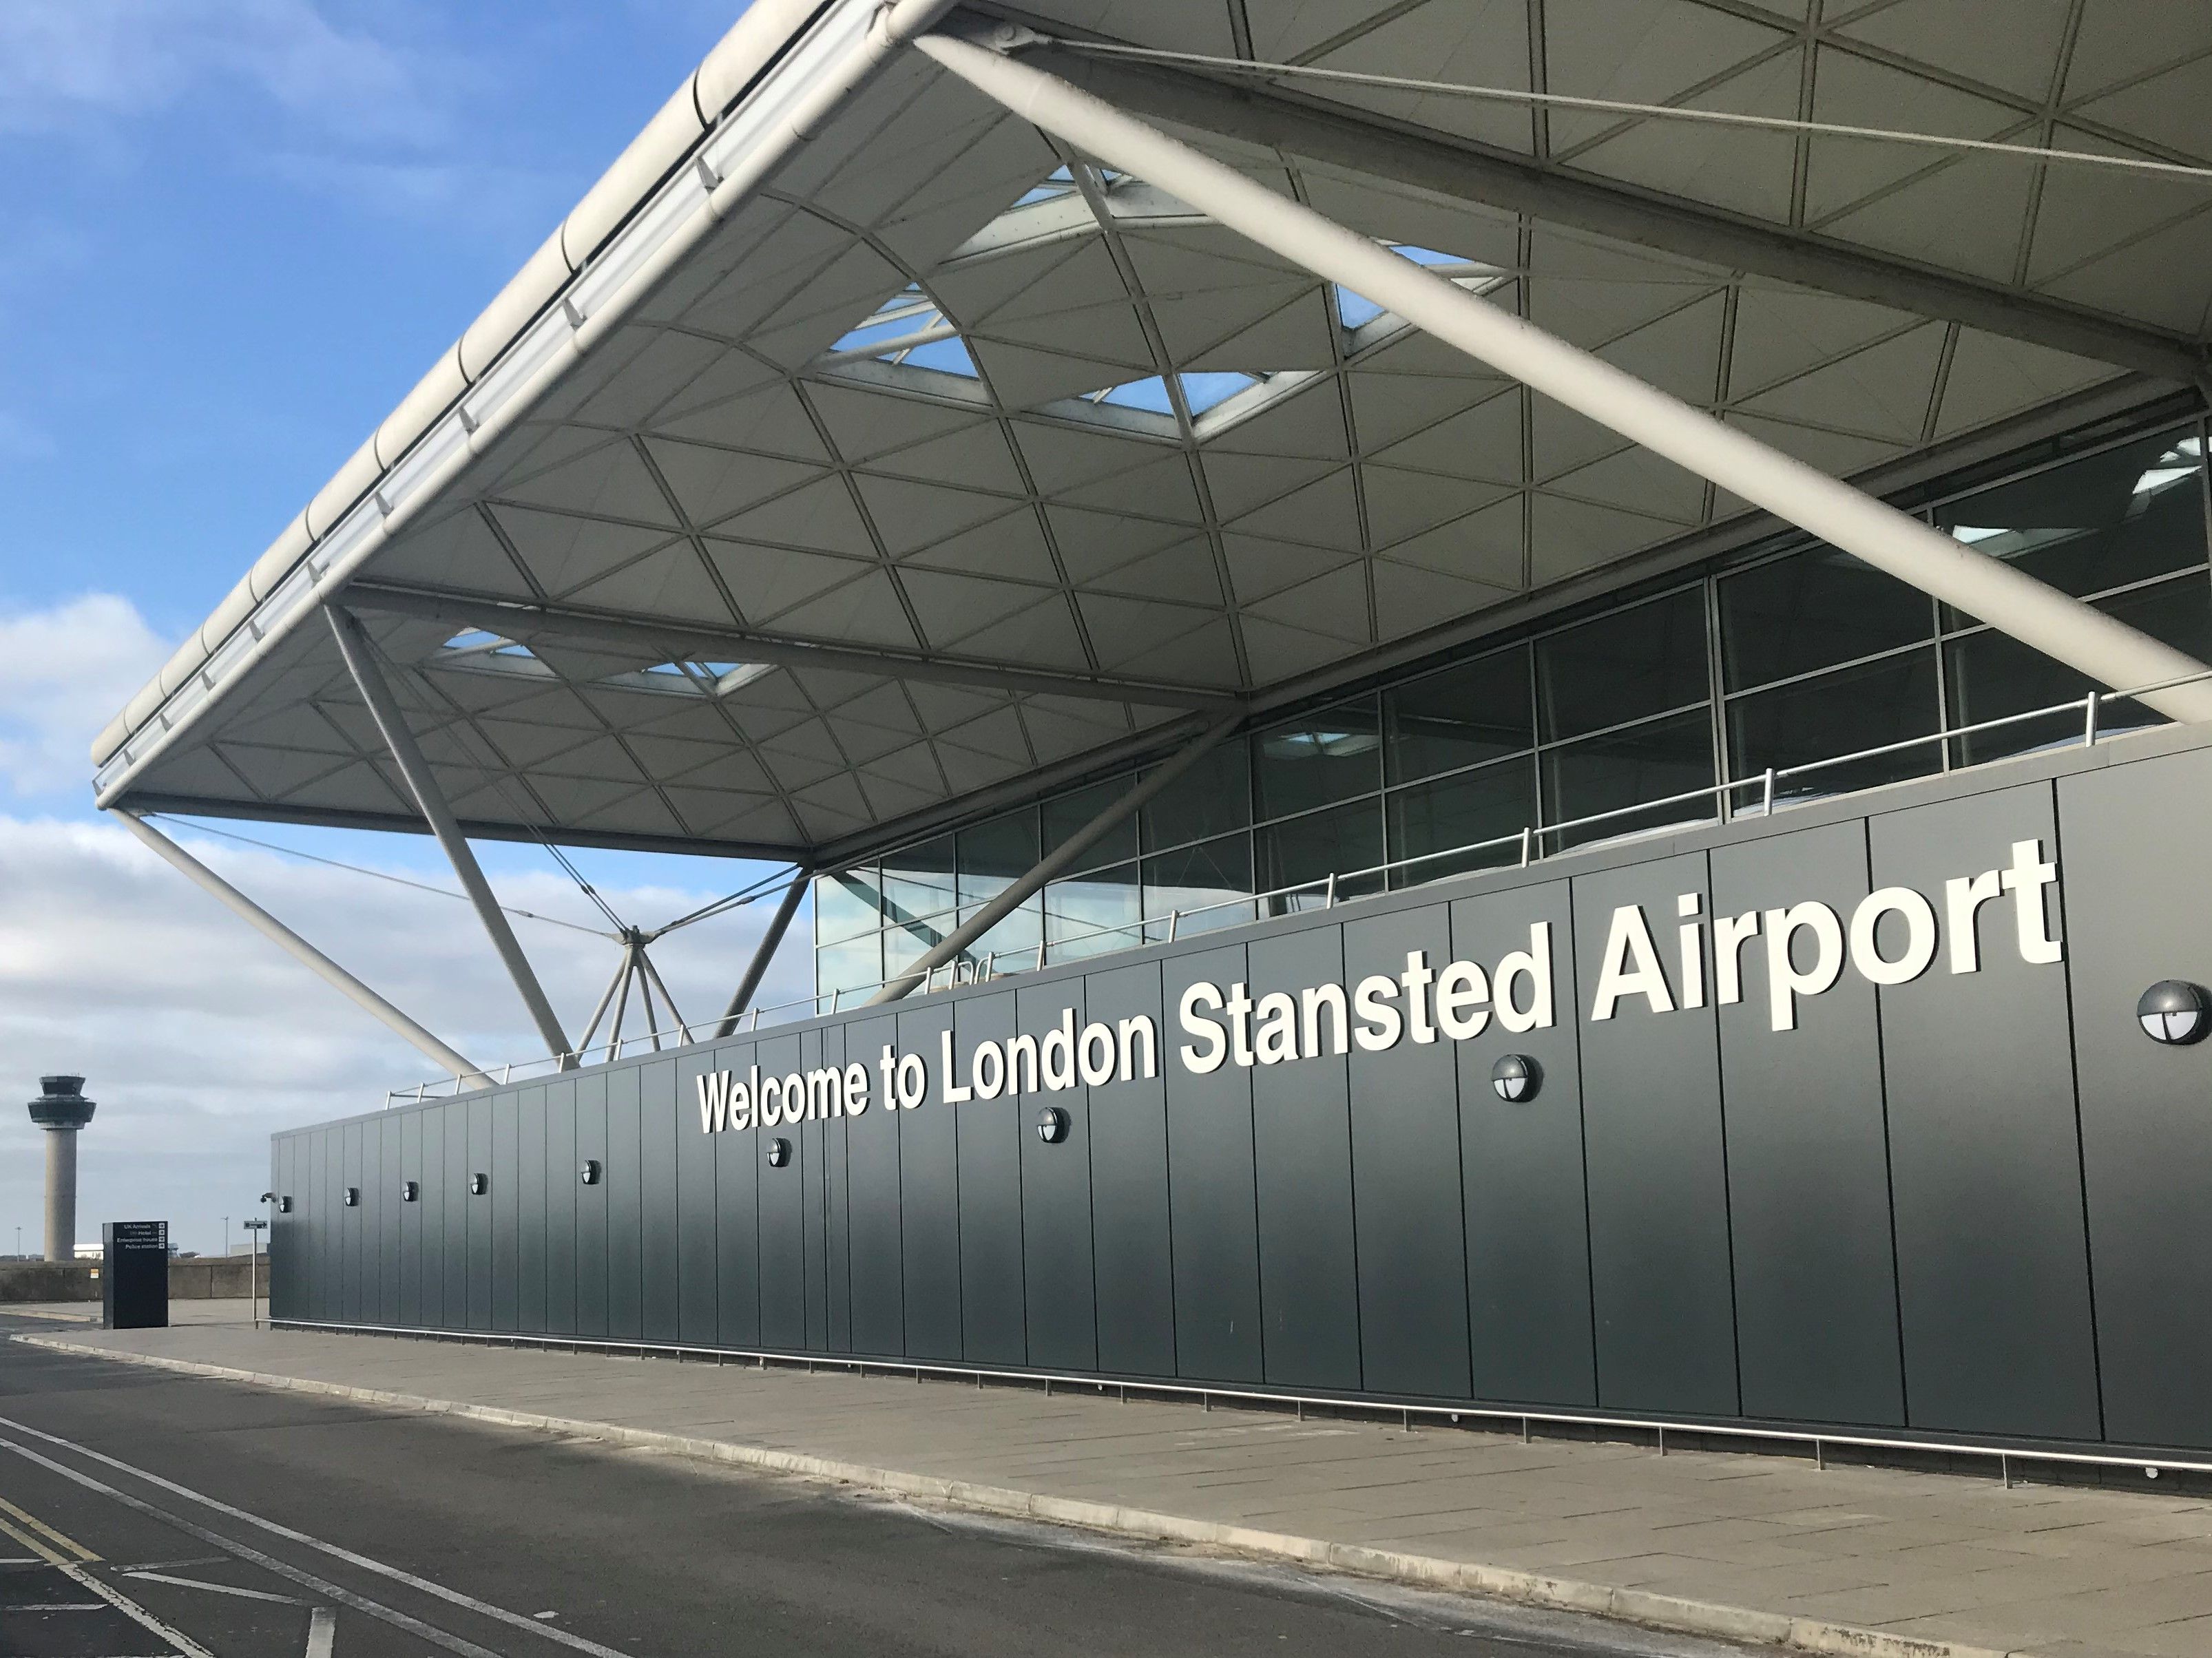 London's Stansted Airport